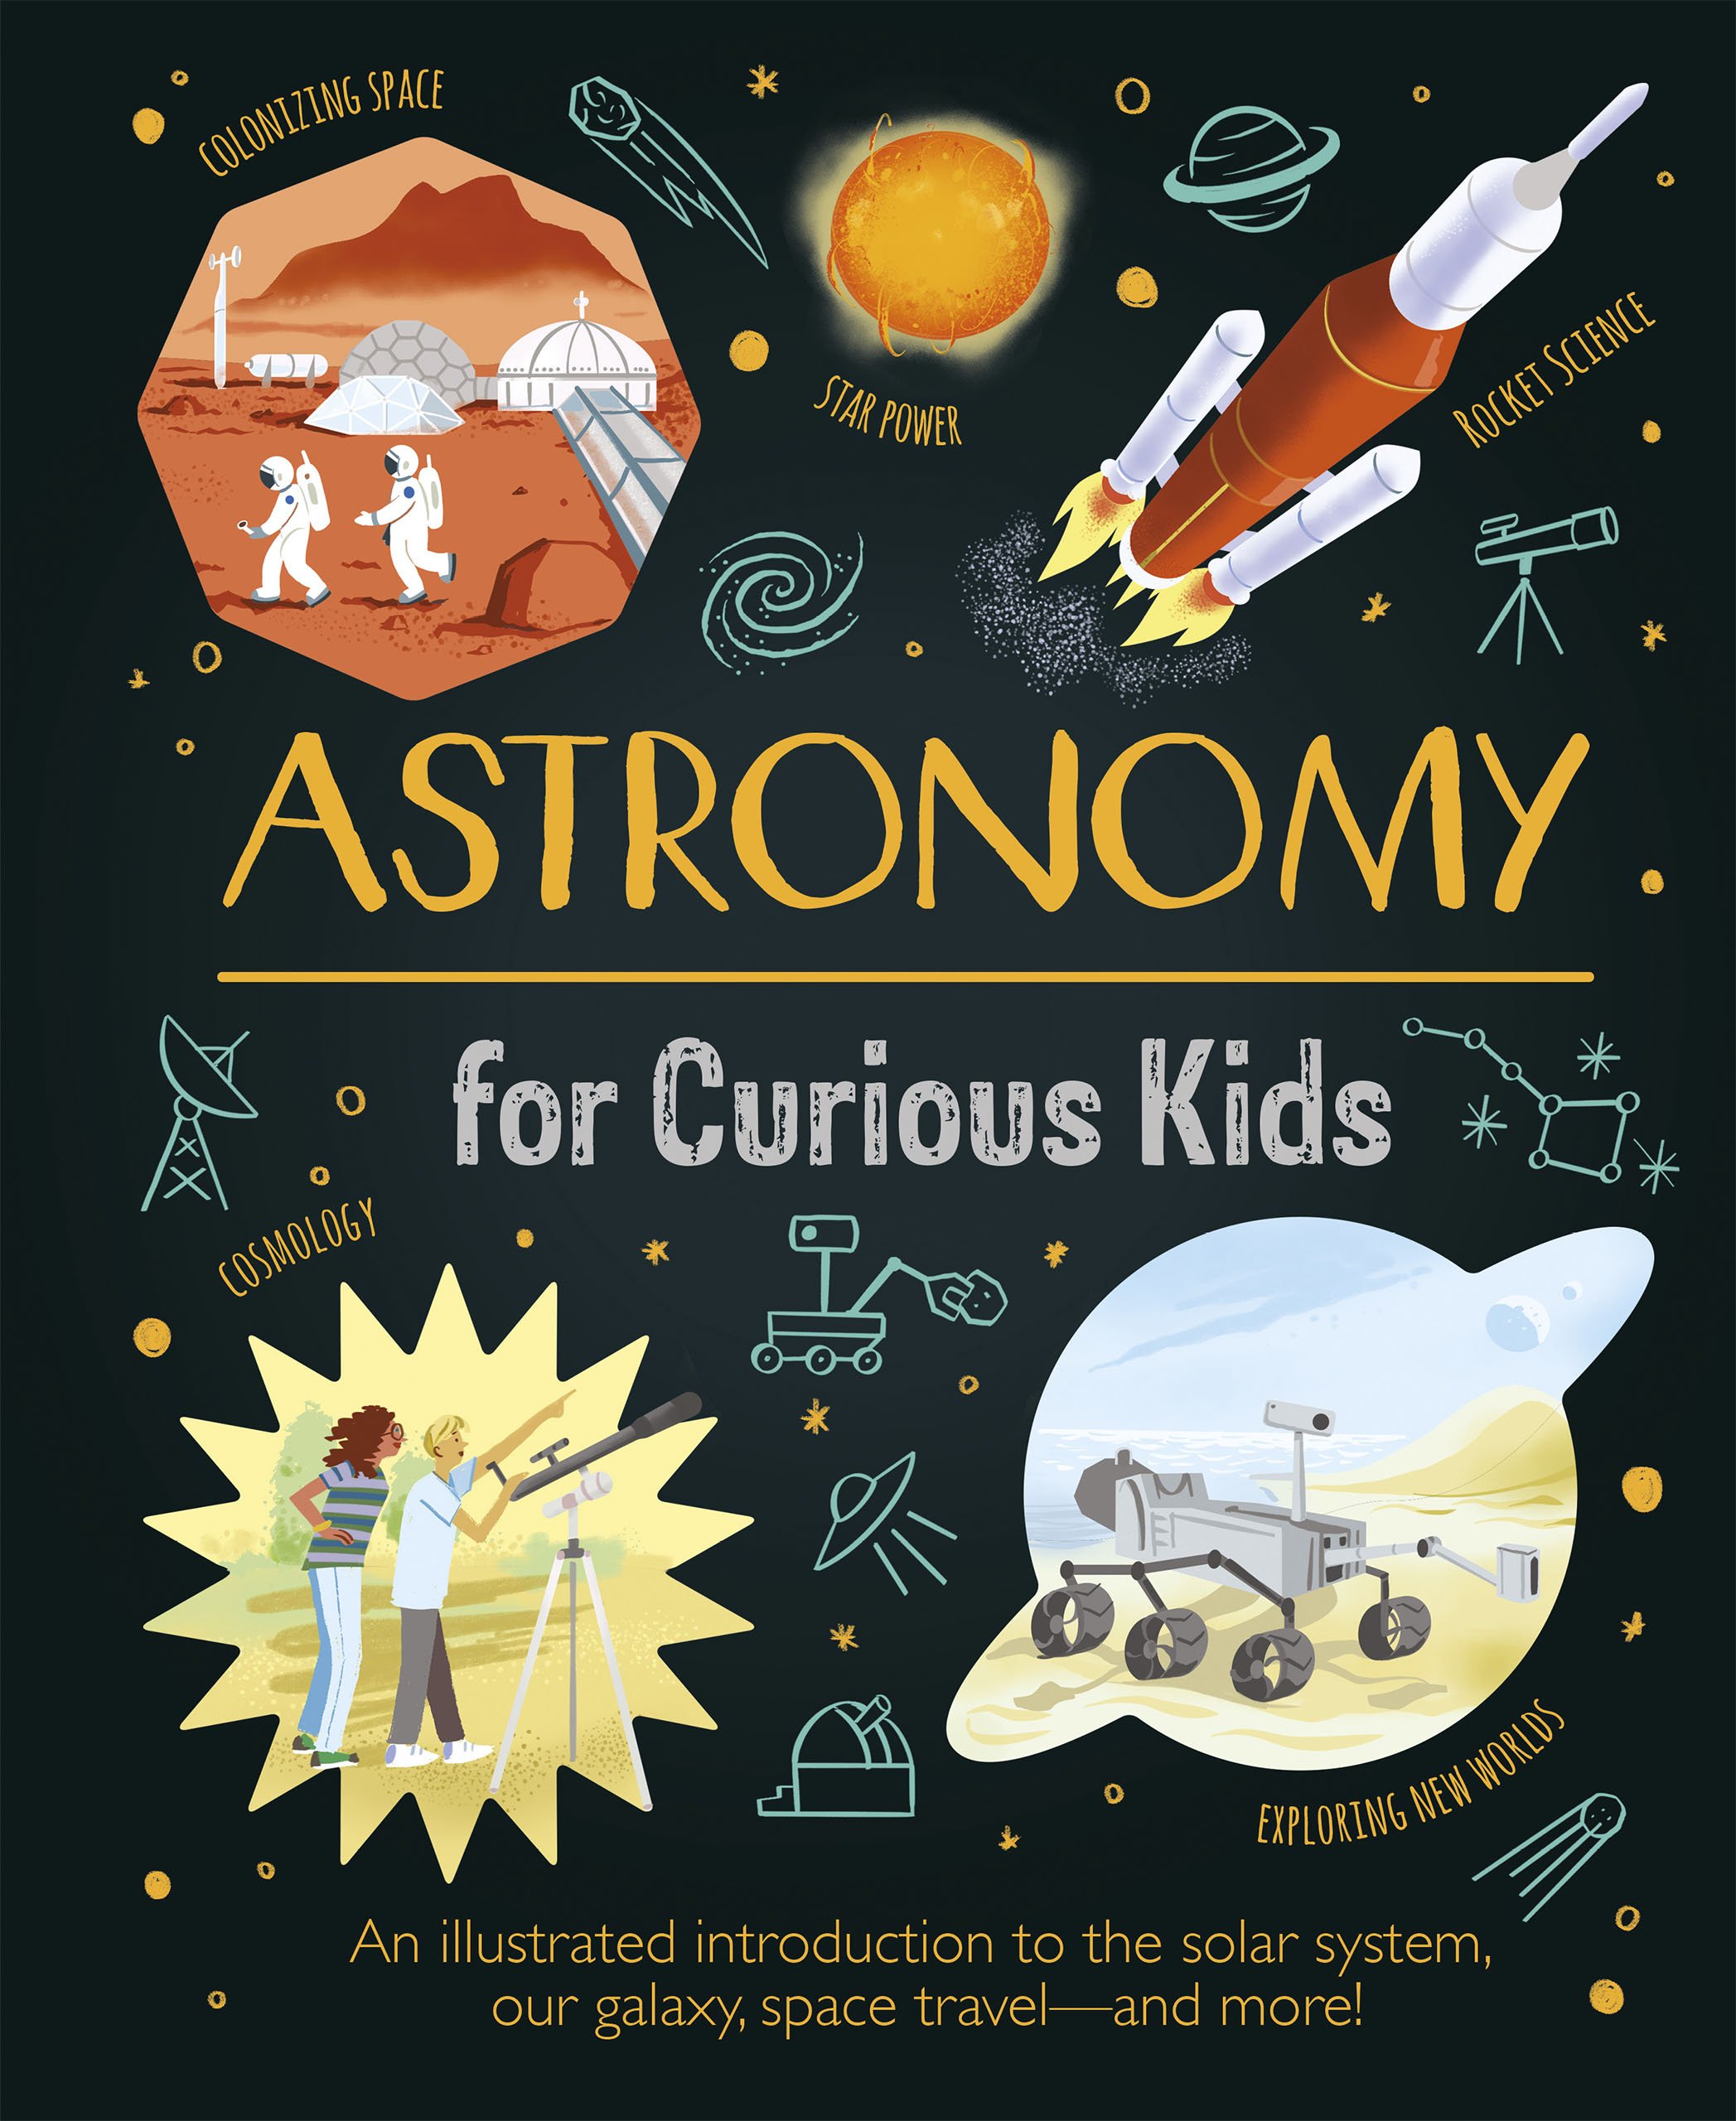 Astronomy For Curious Kids by Giles Sparrow and Nik Neves